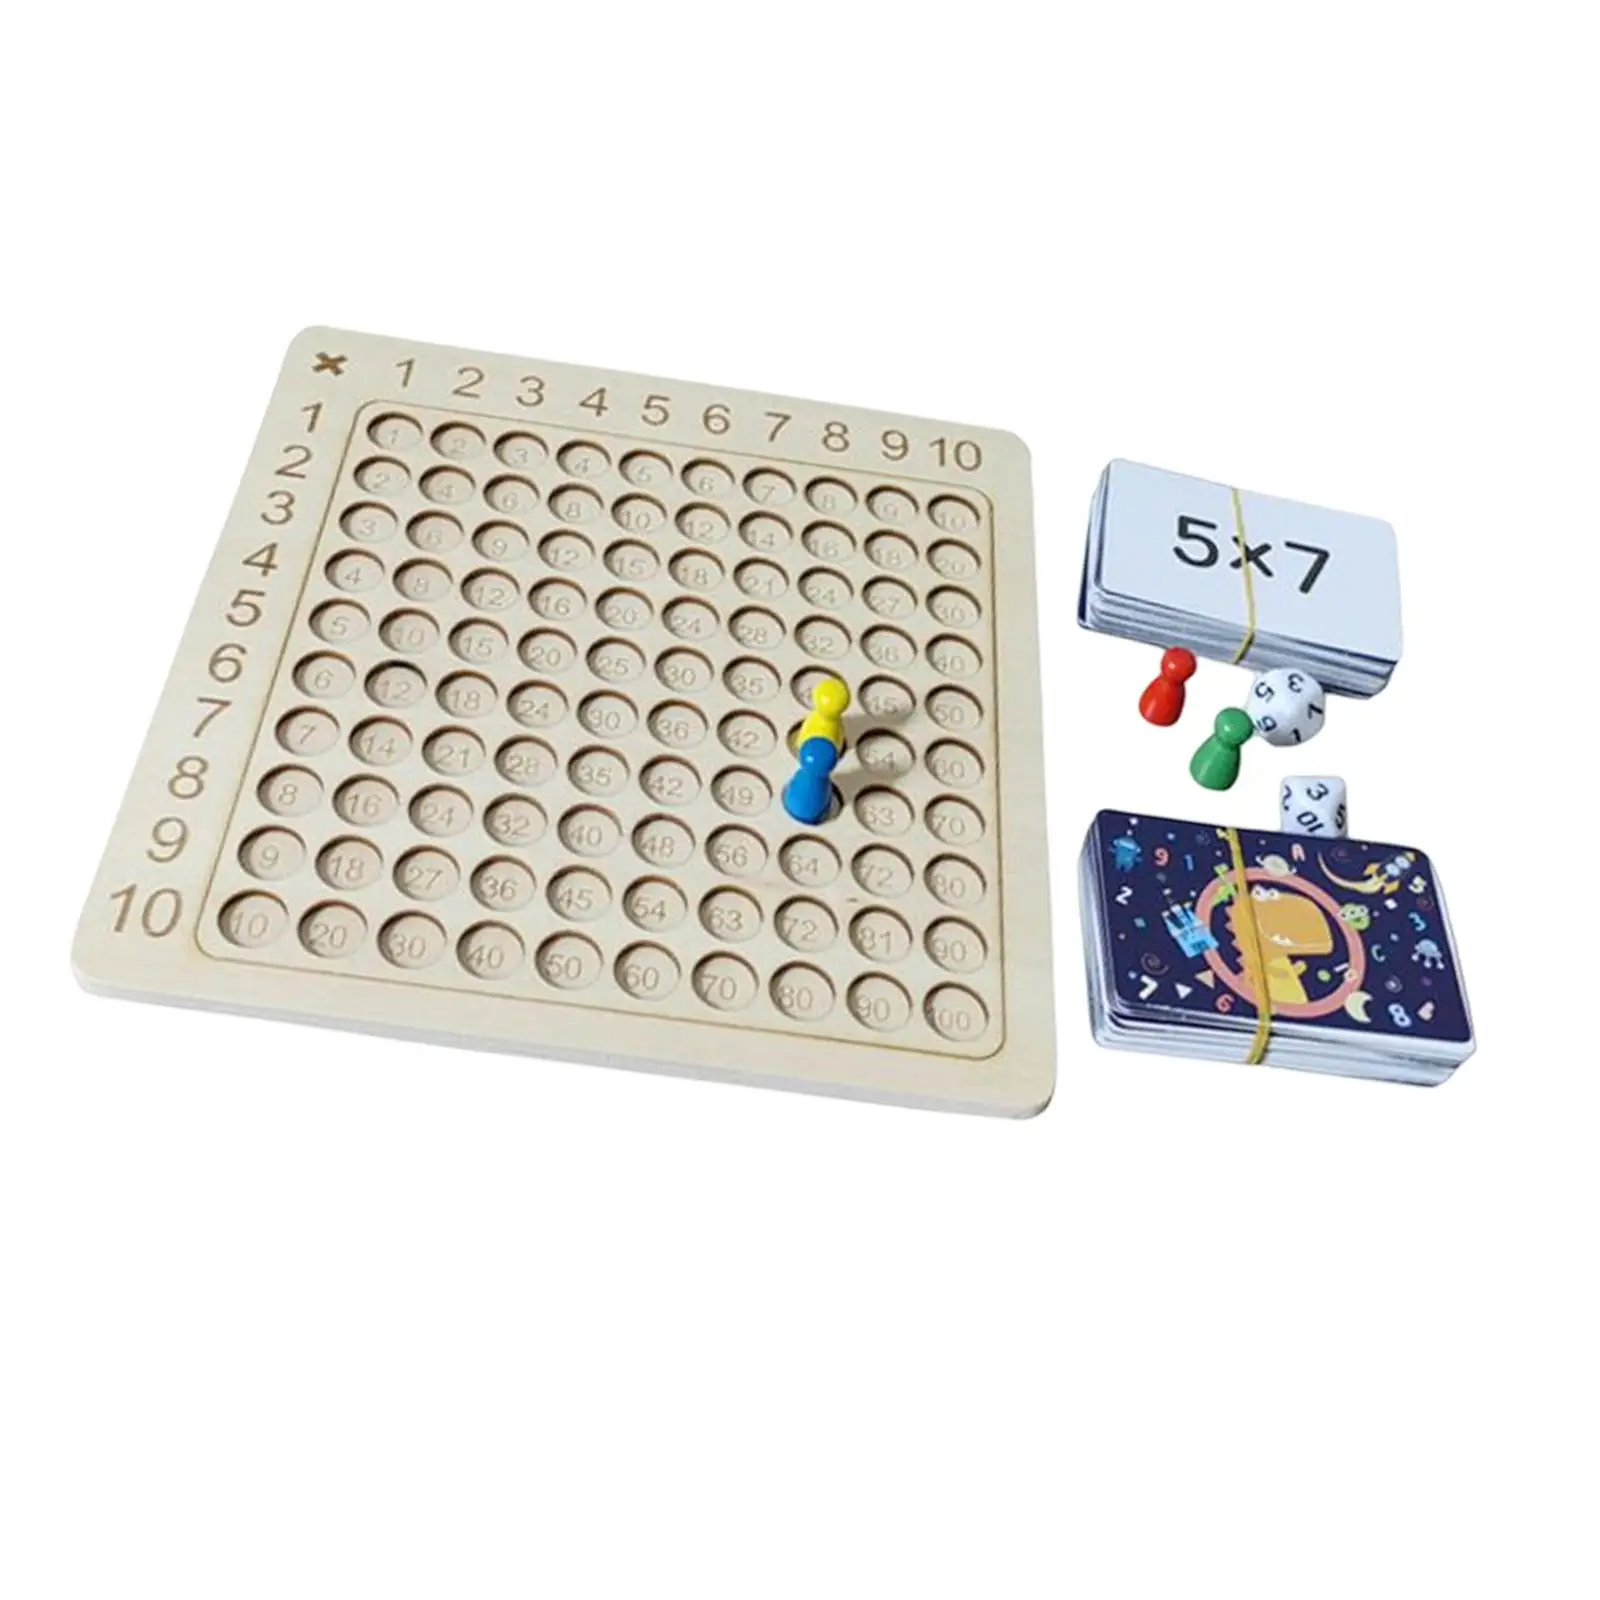 10x10 Number Games Mathematics Educational Game Wooden for Livng Room Unisex